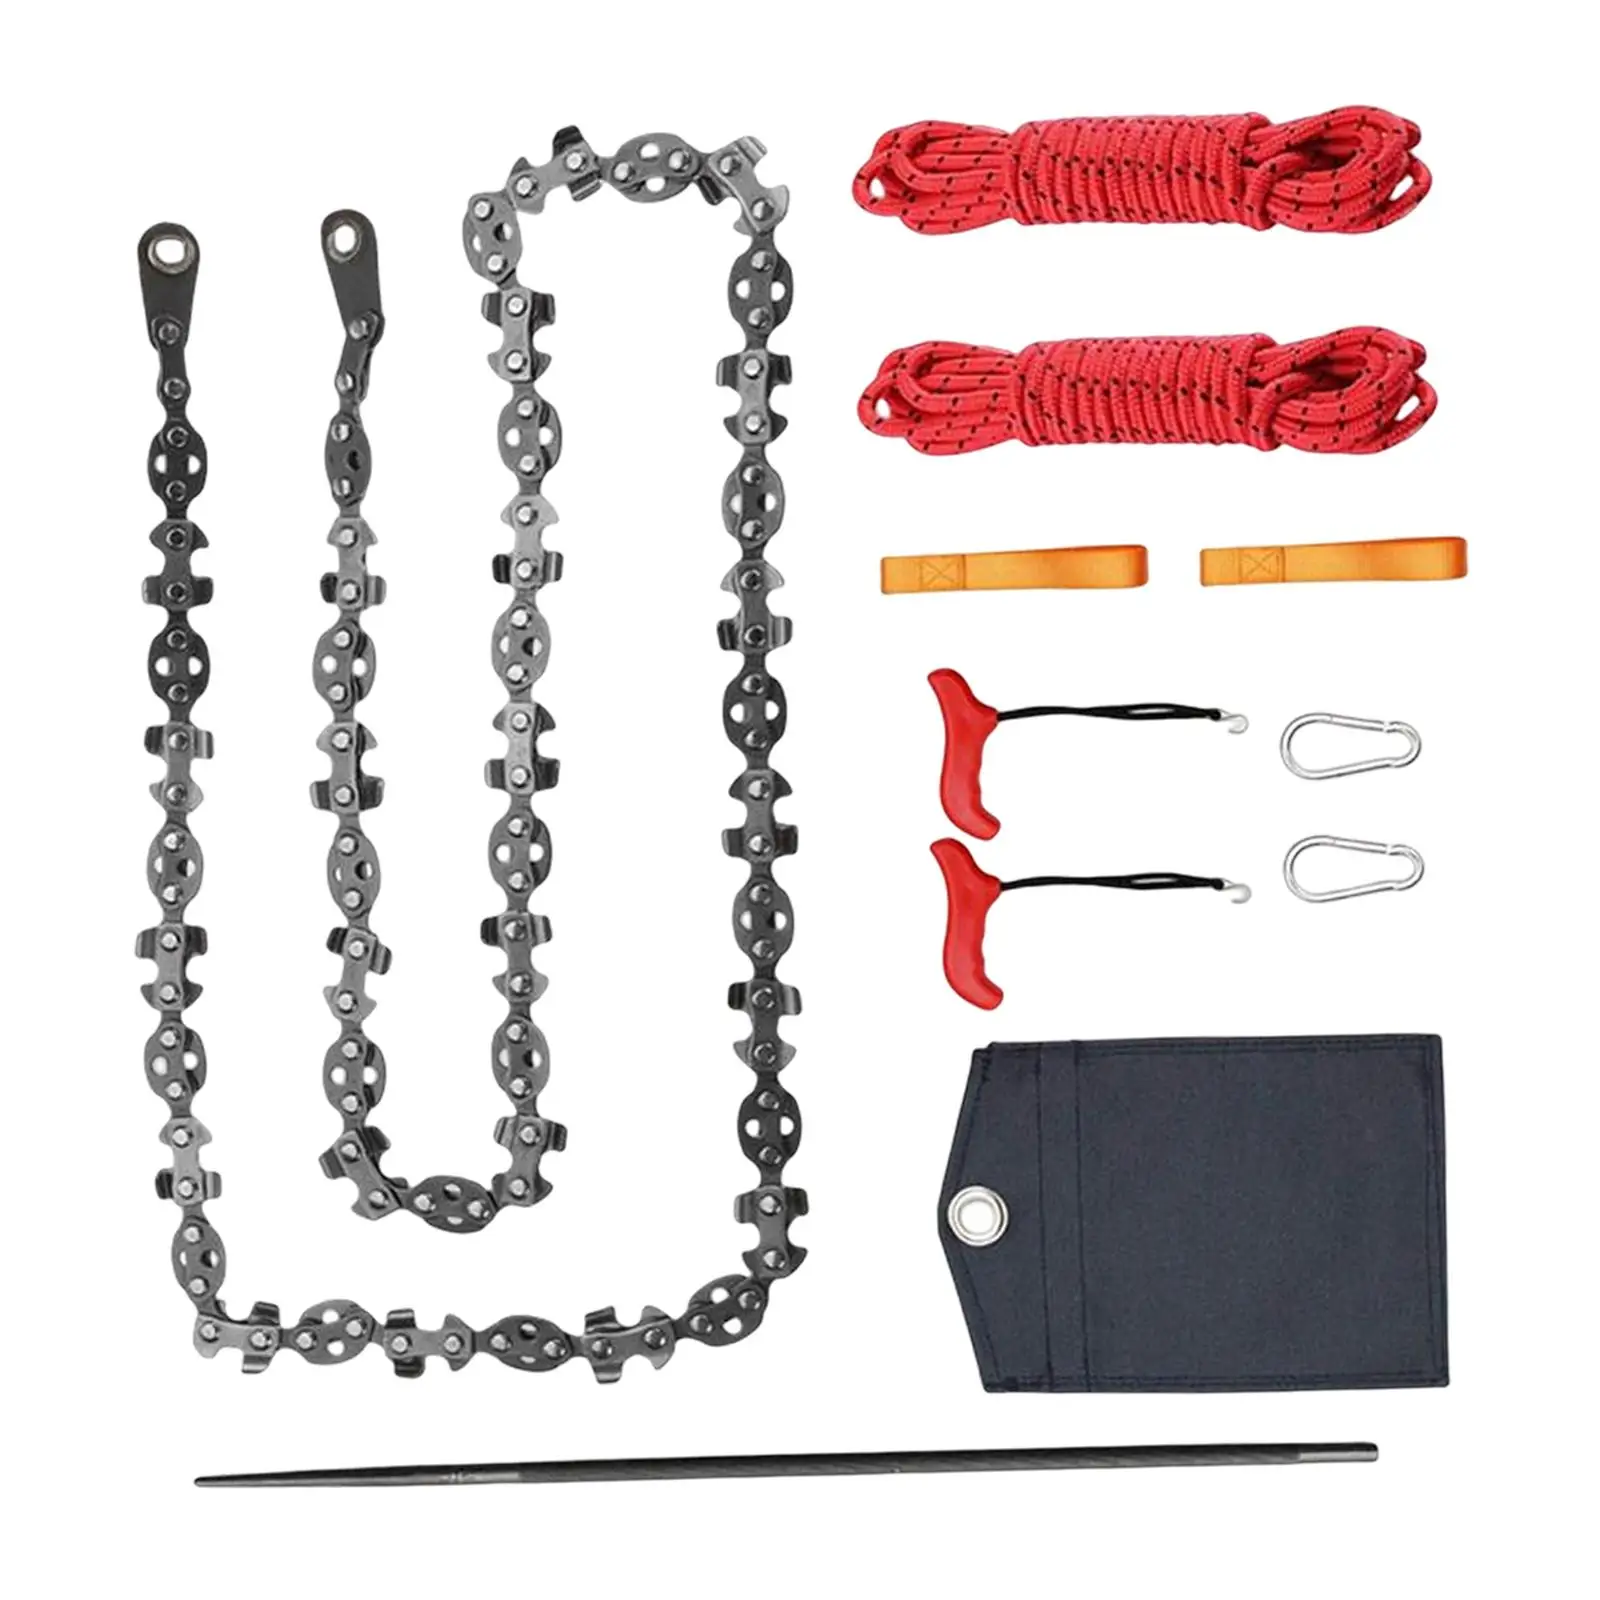 Handheld Emergency Saw Pocket with Storage Bag Zipper Saw Hand Chain Saw for Wood Cutting Gardening Emergency Outdoor Camping